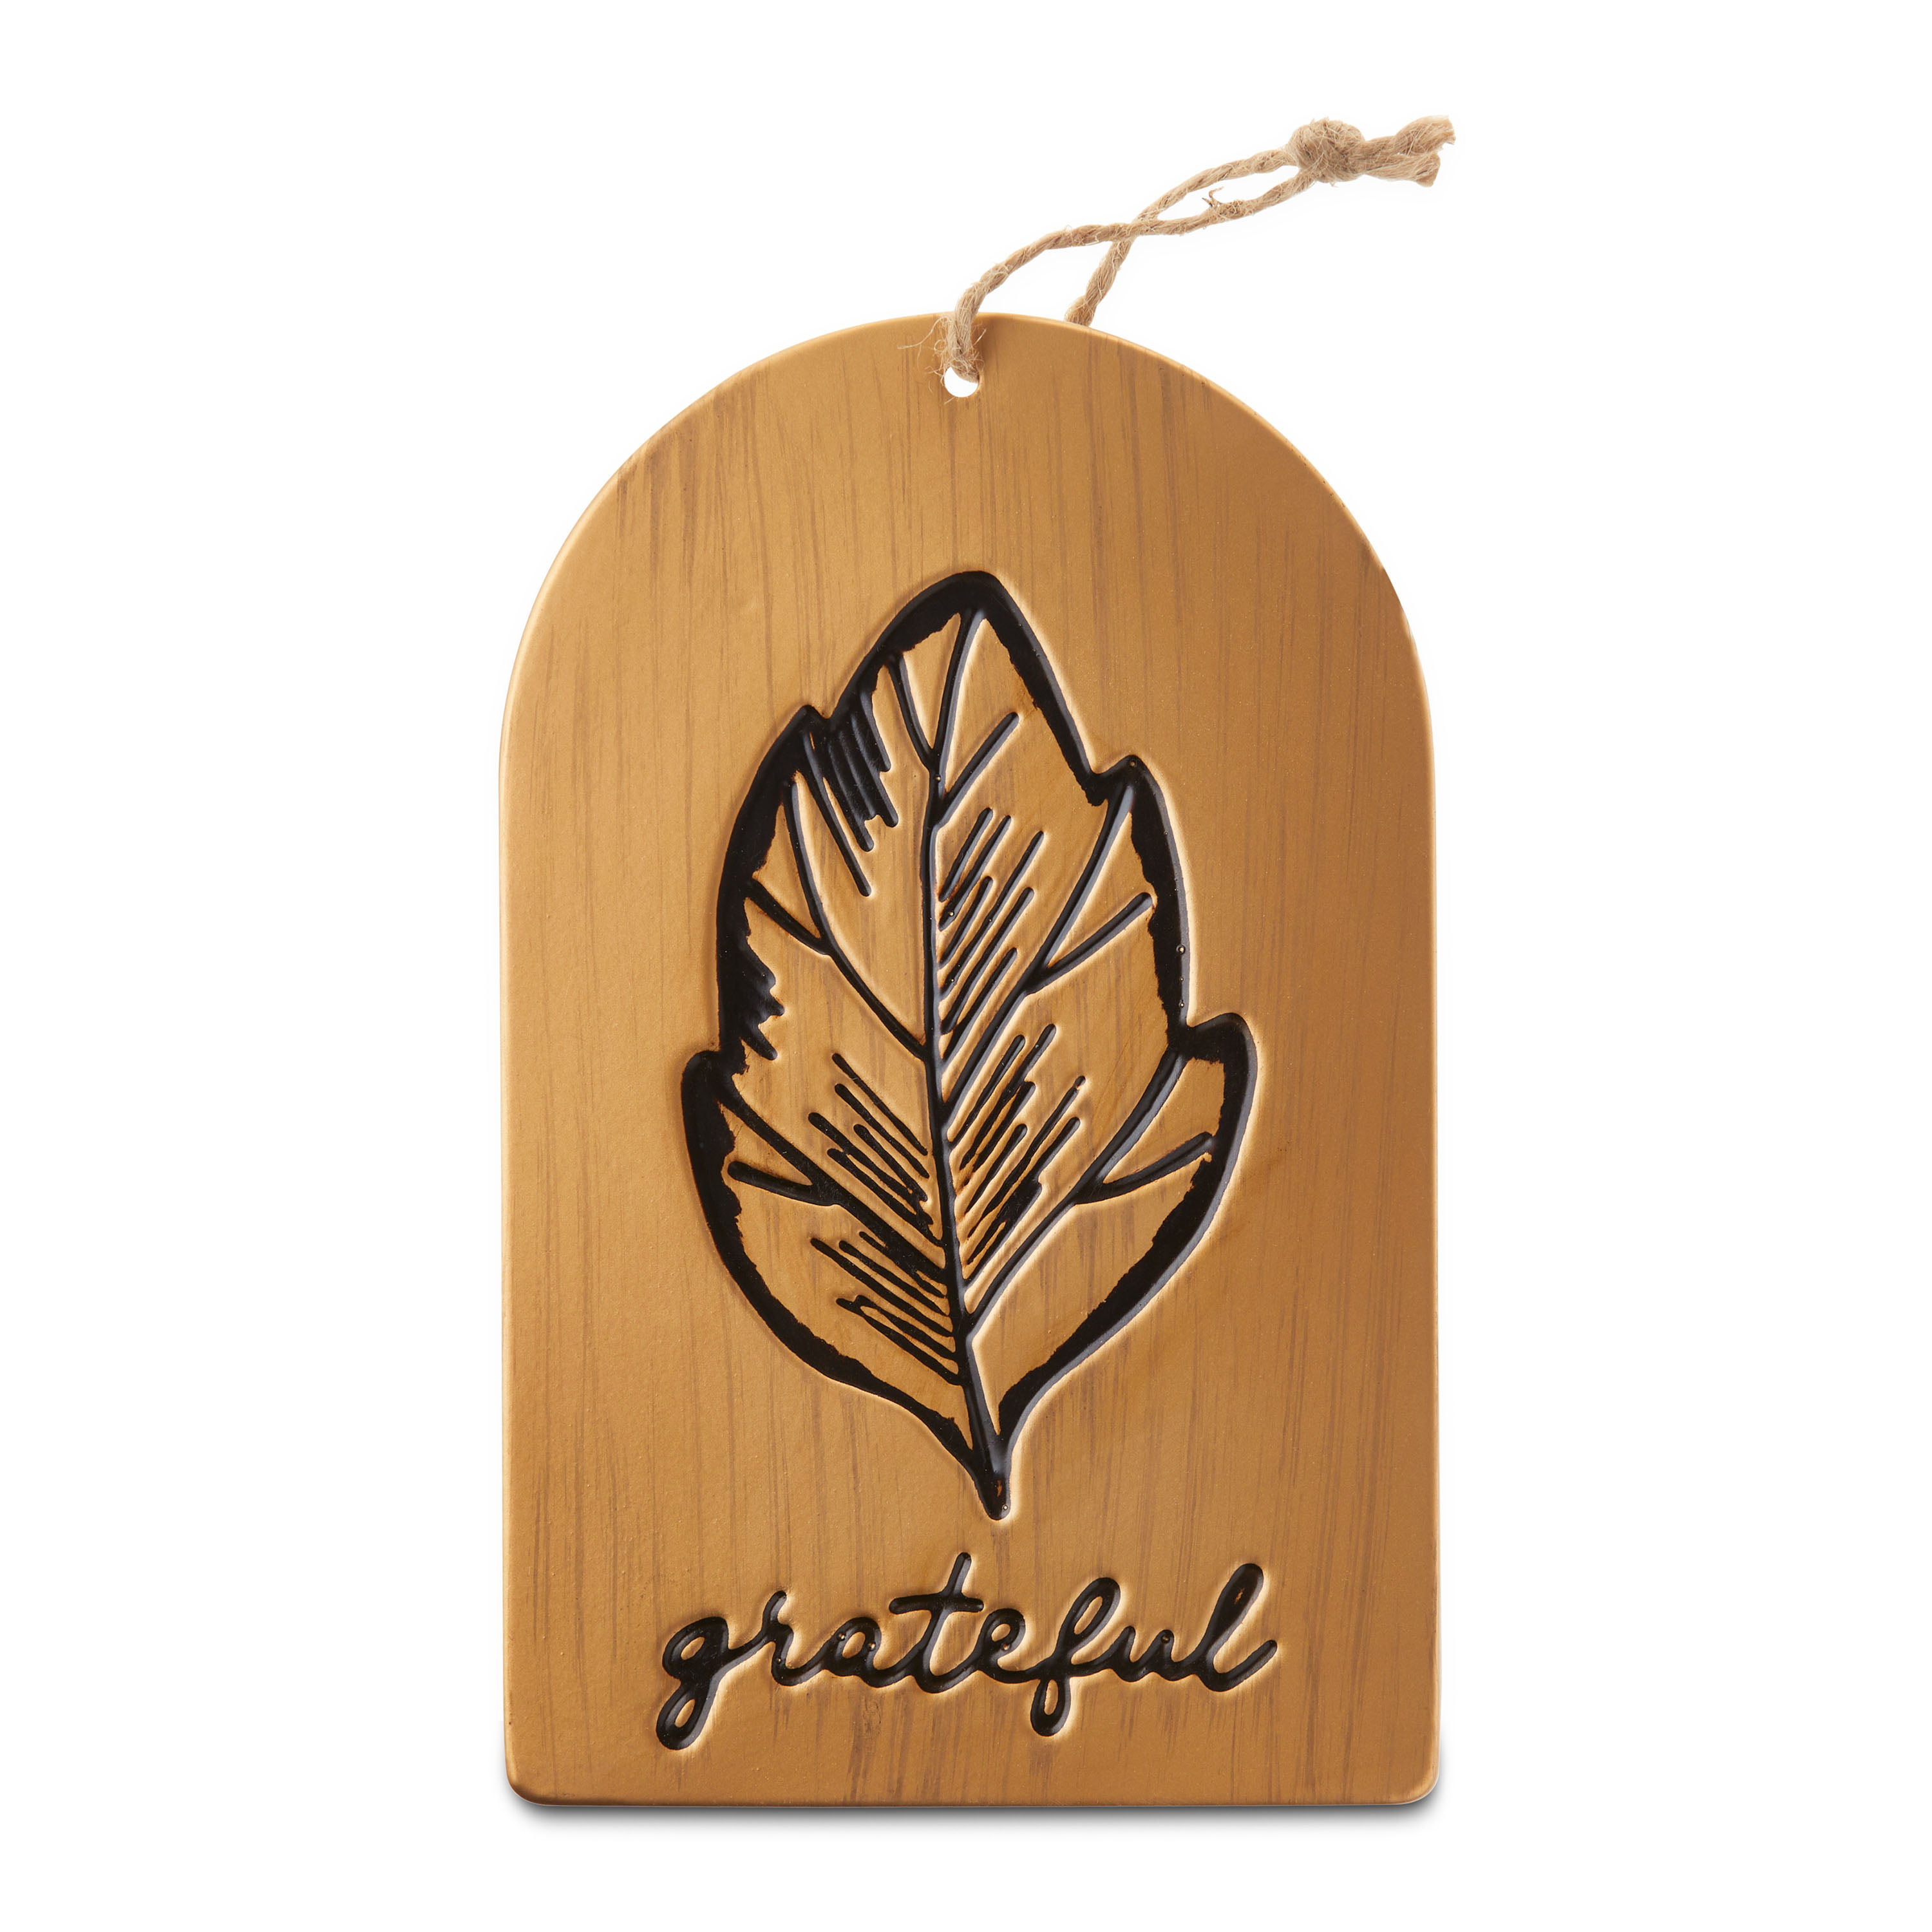 WAY TO CELEBRATE! Way To Celebrate Harvest Grateful Tag Hanging Sign Decoration, 8"